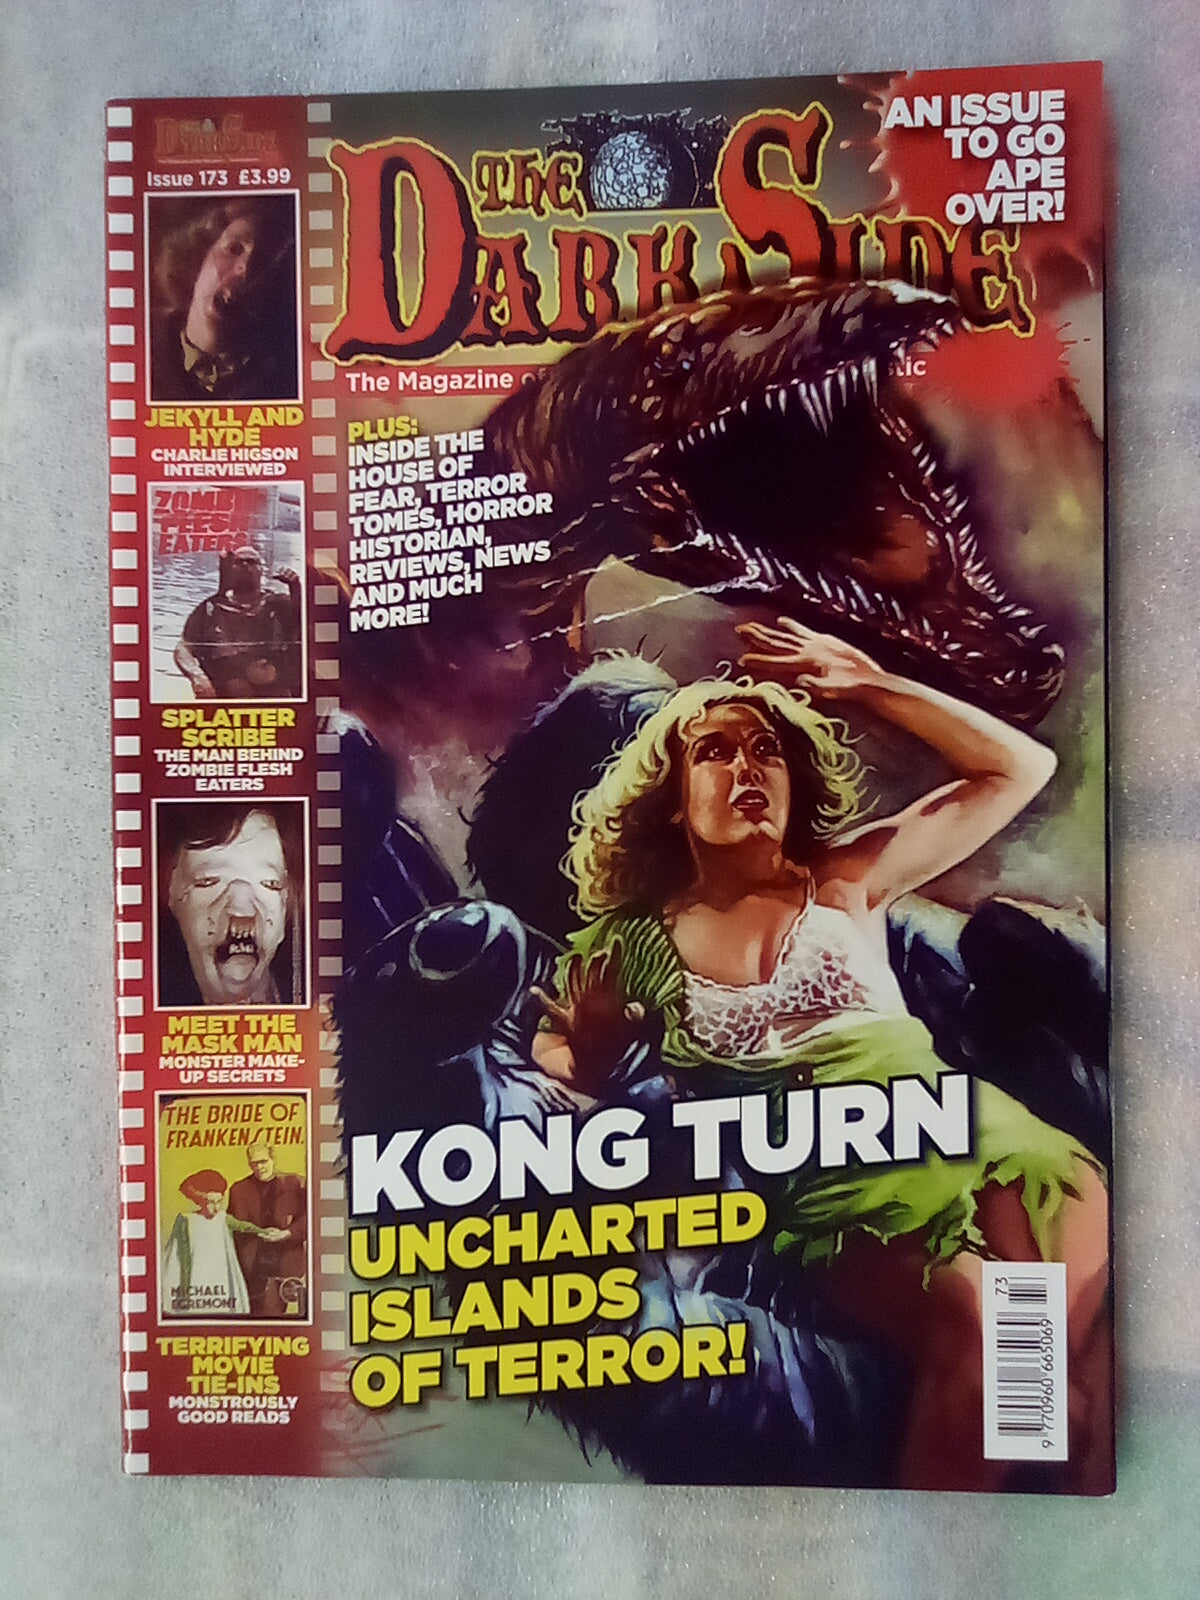 4x Issues of the 'Darkside' Horror Film Magazines (1)